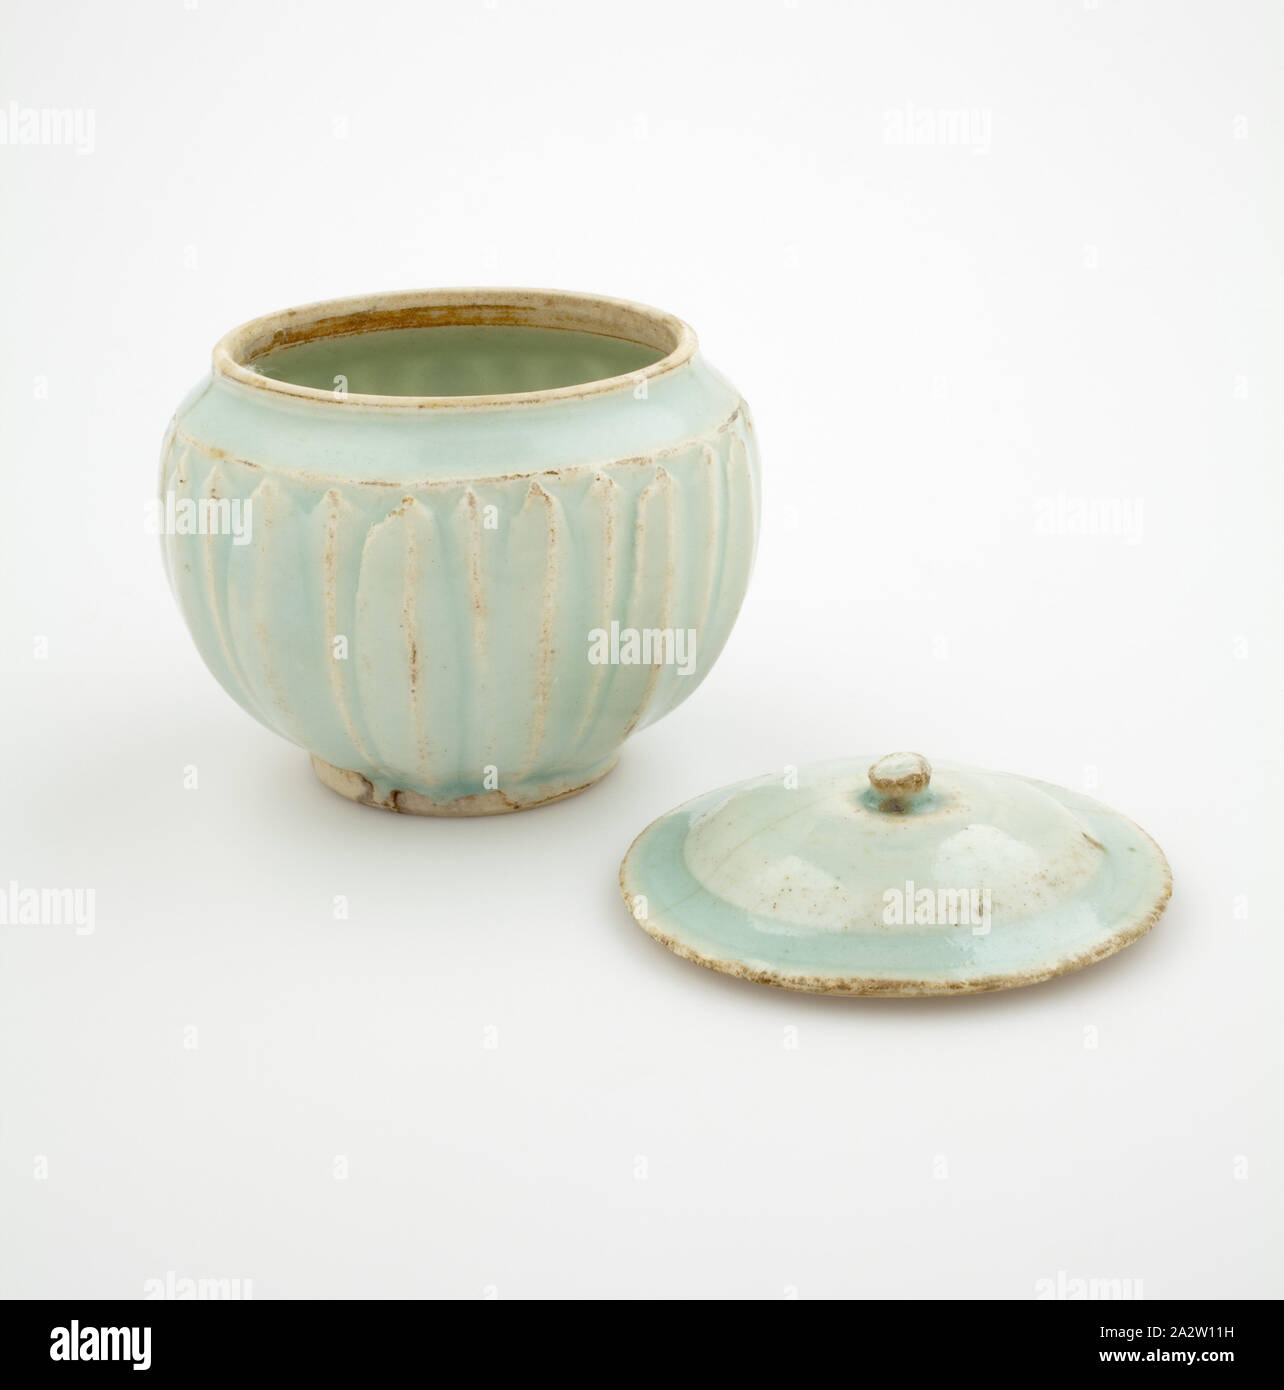 jar with cover, Southern Song dynasty, Southern Song dynasty, 1100s, porcelain with bluish-white glaze, 3-3/4 x 2-7/8 in., Asian Art Stock Photo